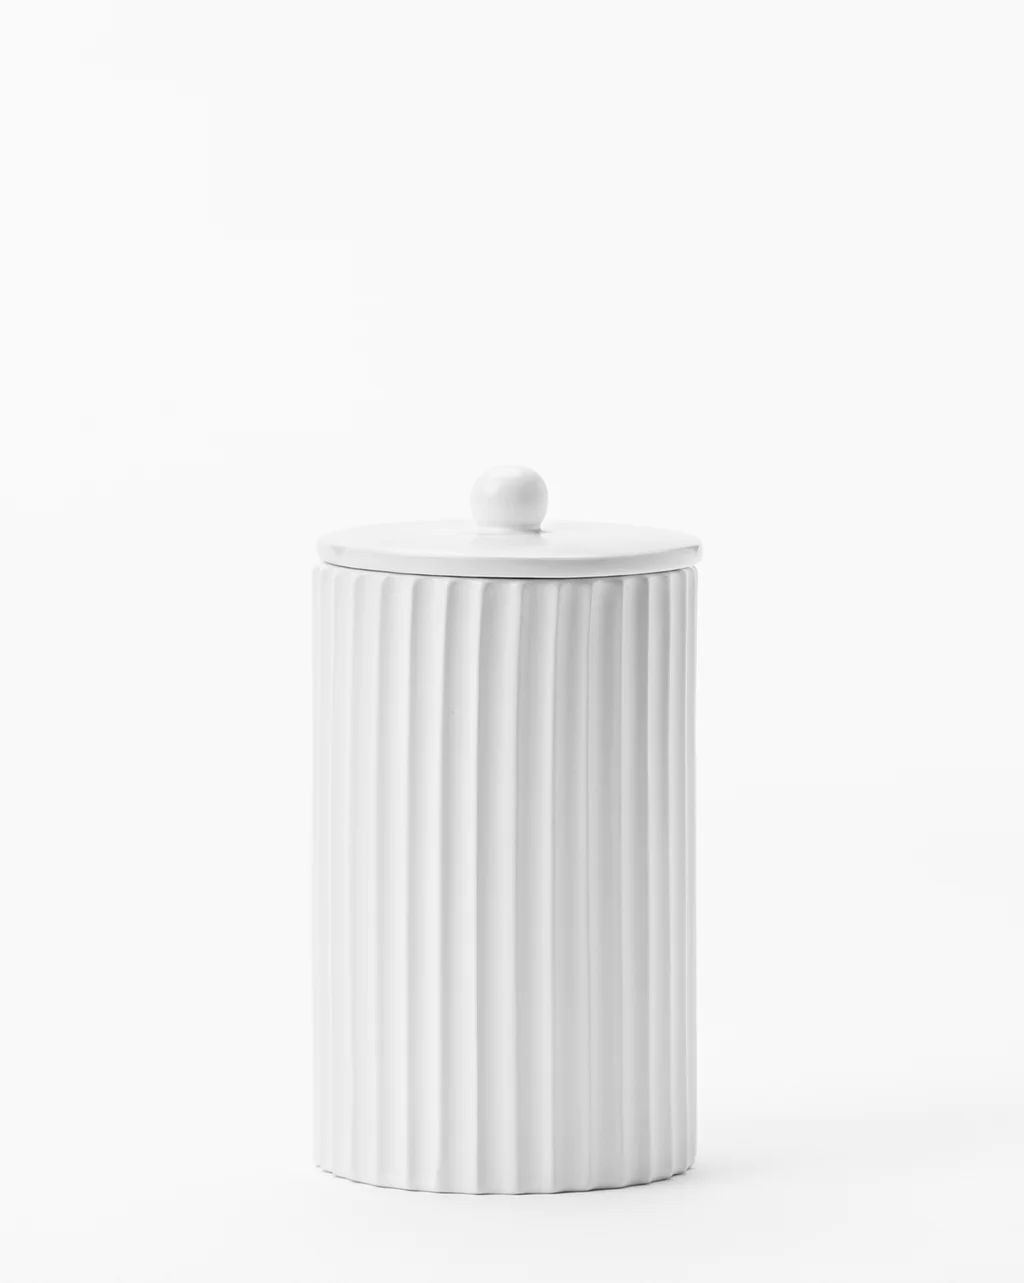 Fluted Lidded Bathroom Canister | McGee & Co.